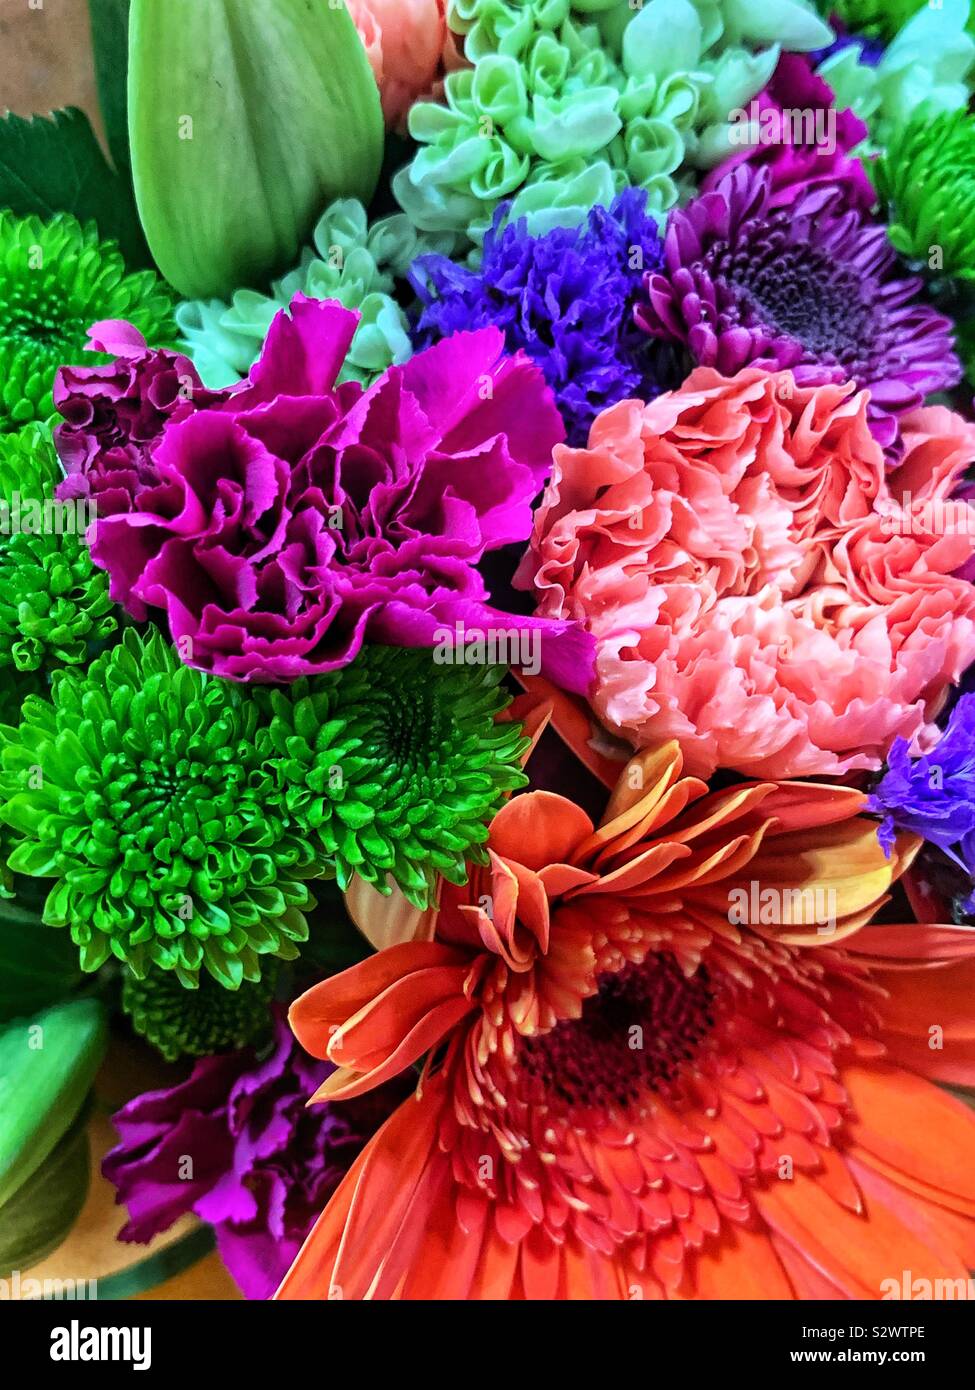 Beautiful bouquet of pink carnations and and orange daisy with green foliage. Stock Photo